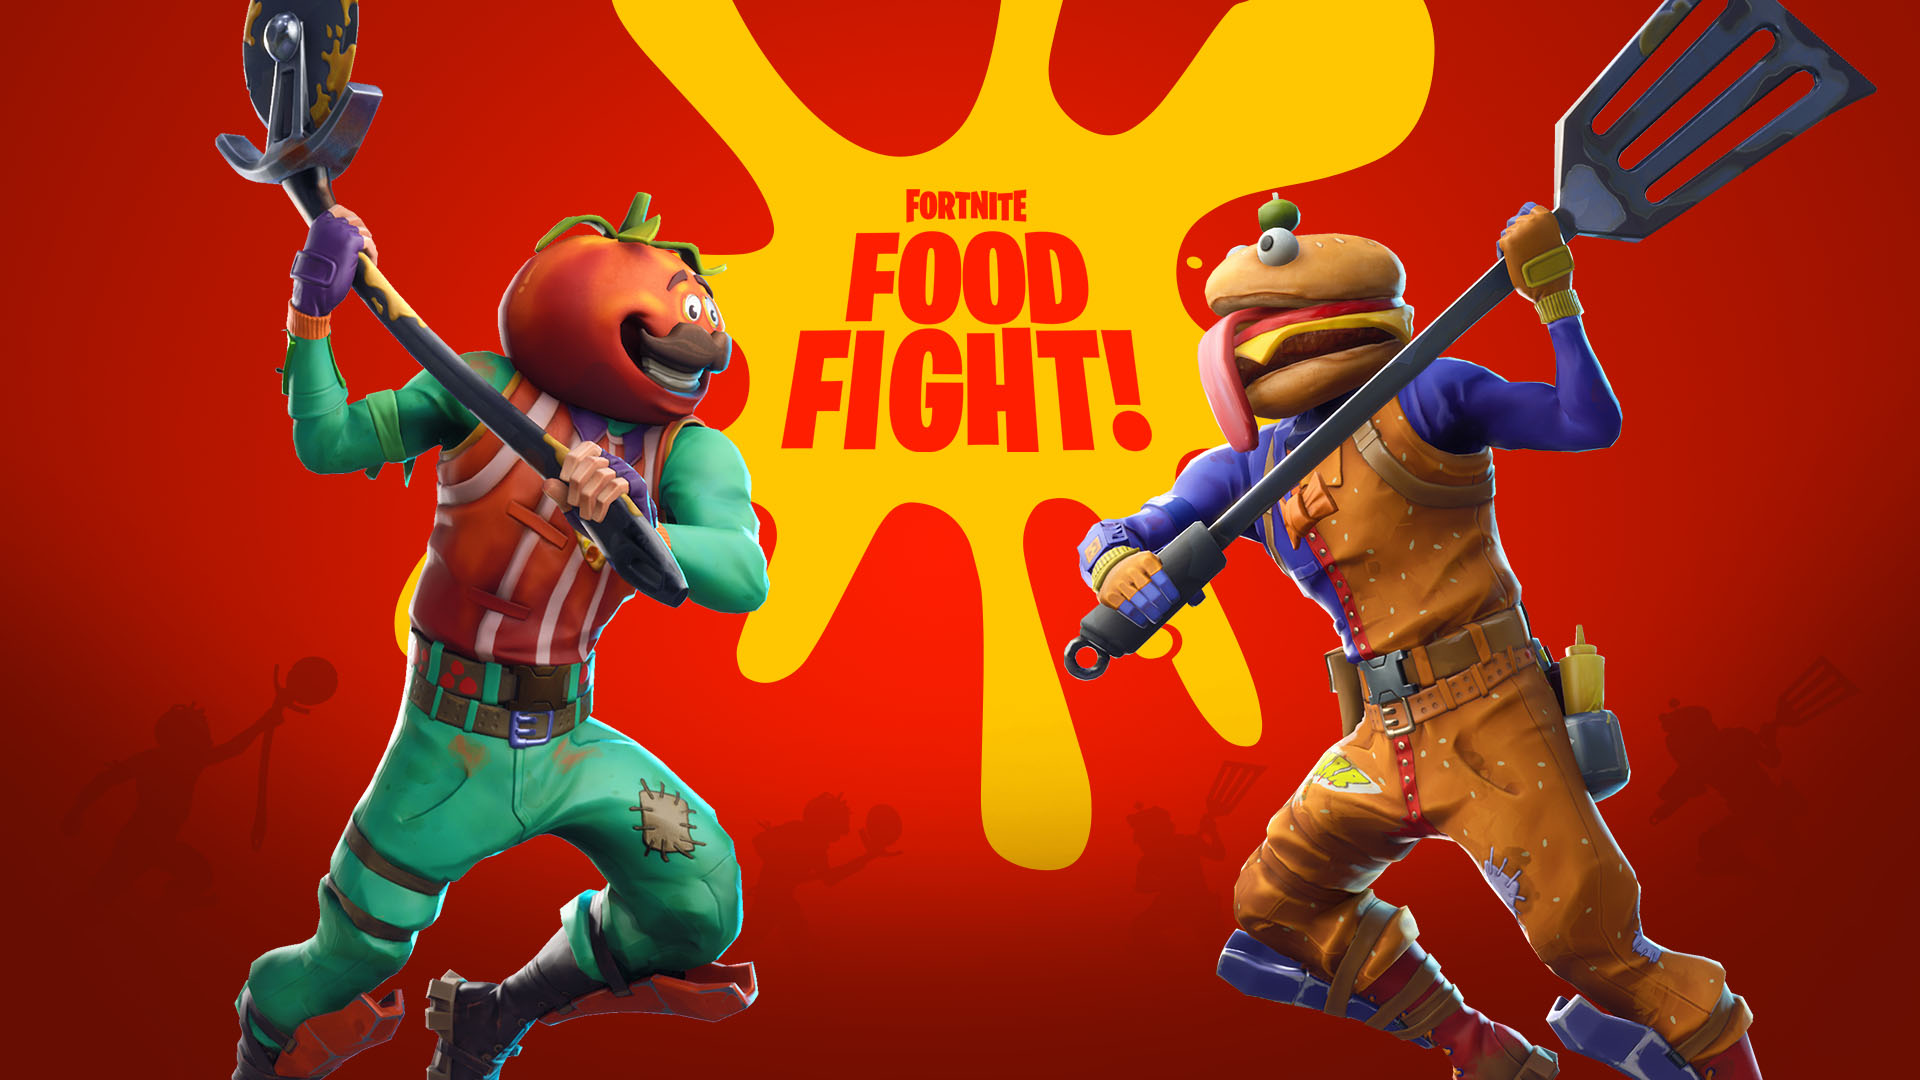 fortnite s food fight ltm receives adjustments to help players feel like they re making more progress - fortnite rule 24